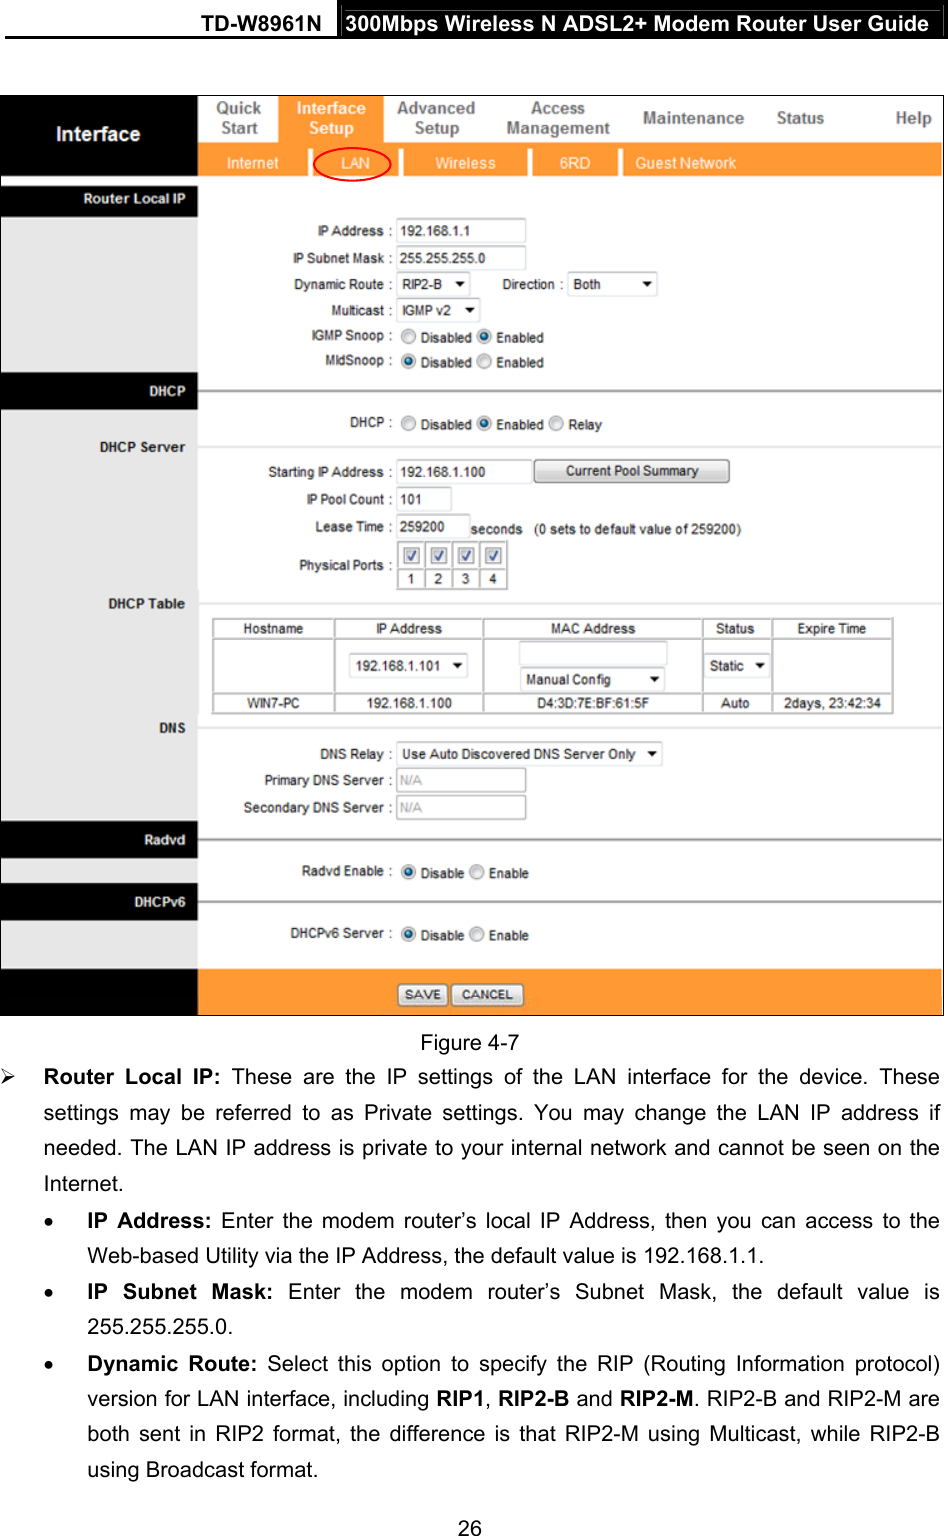 TD-W8961N  300Mbps Wireless N ADSL2+ Modem Router User Guide 26    Figure 4-7  Router Local IP: These are the IP settings of the LAN interface for the device. These settings may be referred to as Private settings. You may change the LAN IP address if needed. The LAN IP address is private to your internal network and cannot be seen on the Internet.  IP Address: Enter the modem router’s local IP Address, then you can access to the Web-based Utility via the IP Address, the default value is 192.168.1.1.  IP Subnet Mask: Enter the modem router’s Subnet Mask, the default value is 255.255.255.0.  Dynamic Route: Select this option to specify the RIP (Routing Information protocol) version for LAN interface, including RIP1, RIP2-B and RIP2-M. RIP2-B and RIP2-M are both sent in RIP2 format, the difference is that RIP2-M using Multicast, while RIP2-B using Broadcast format. 